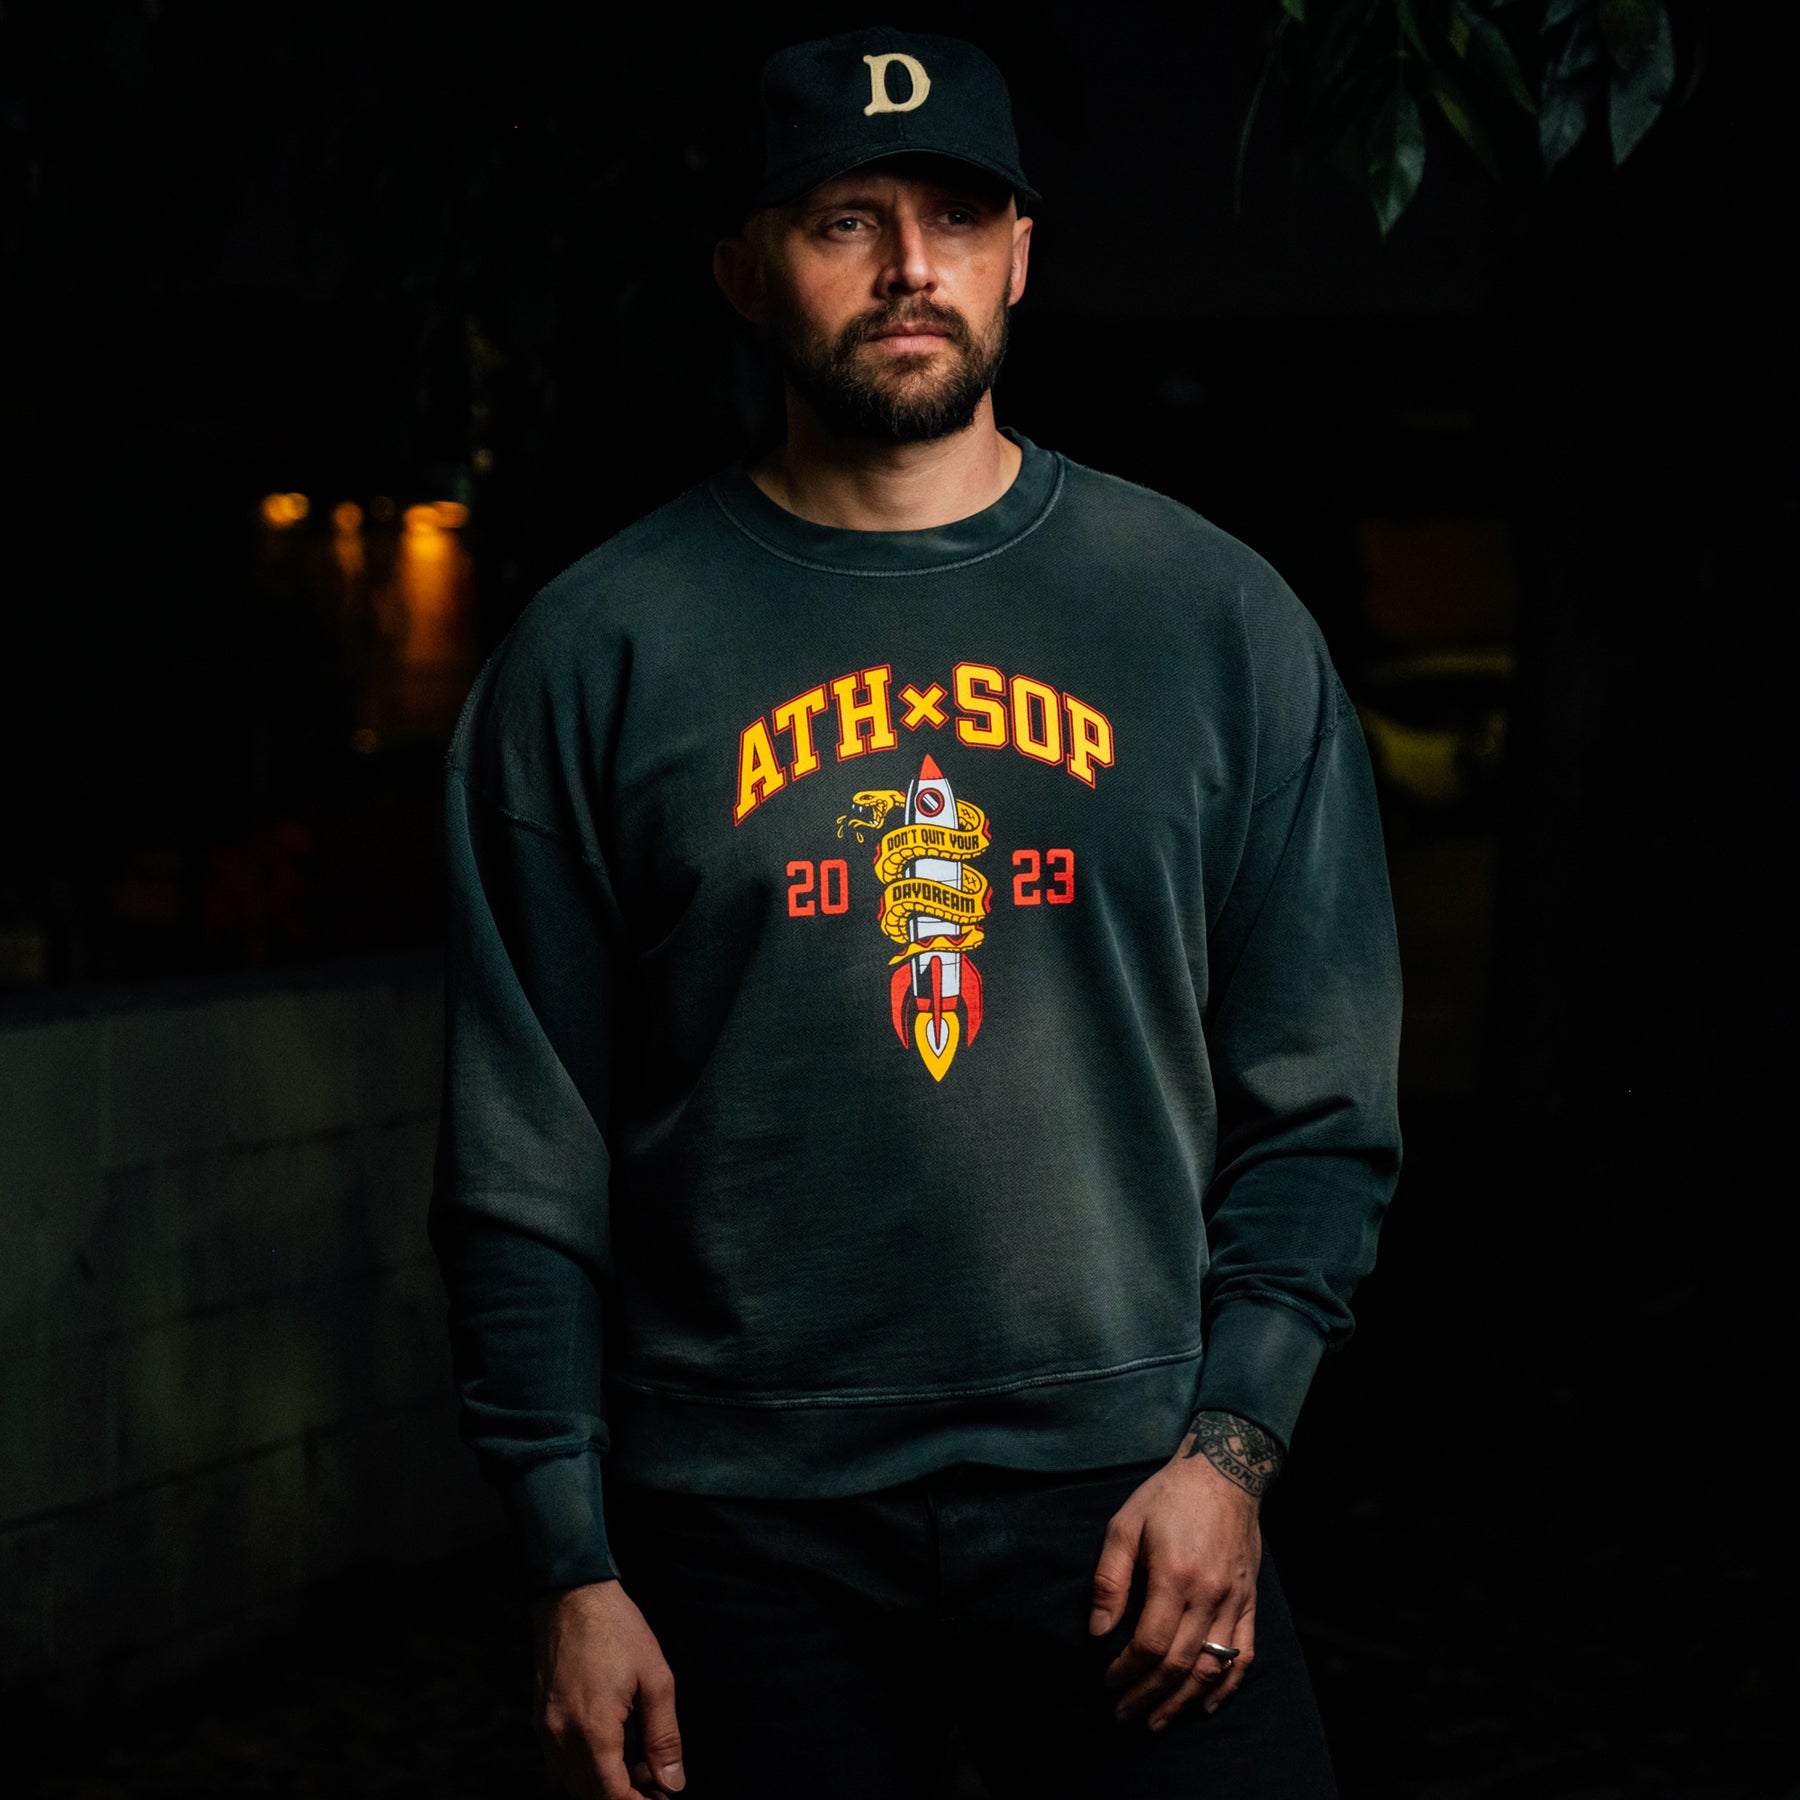 All-Time High x Snake Oil Provisions Collab Crewneck Ash